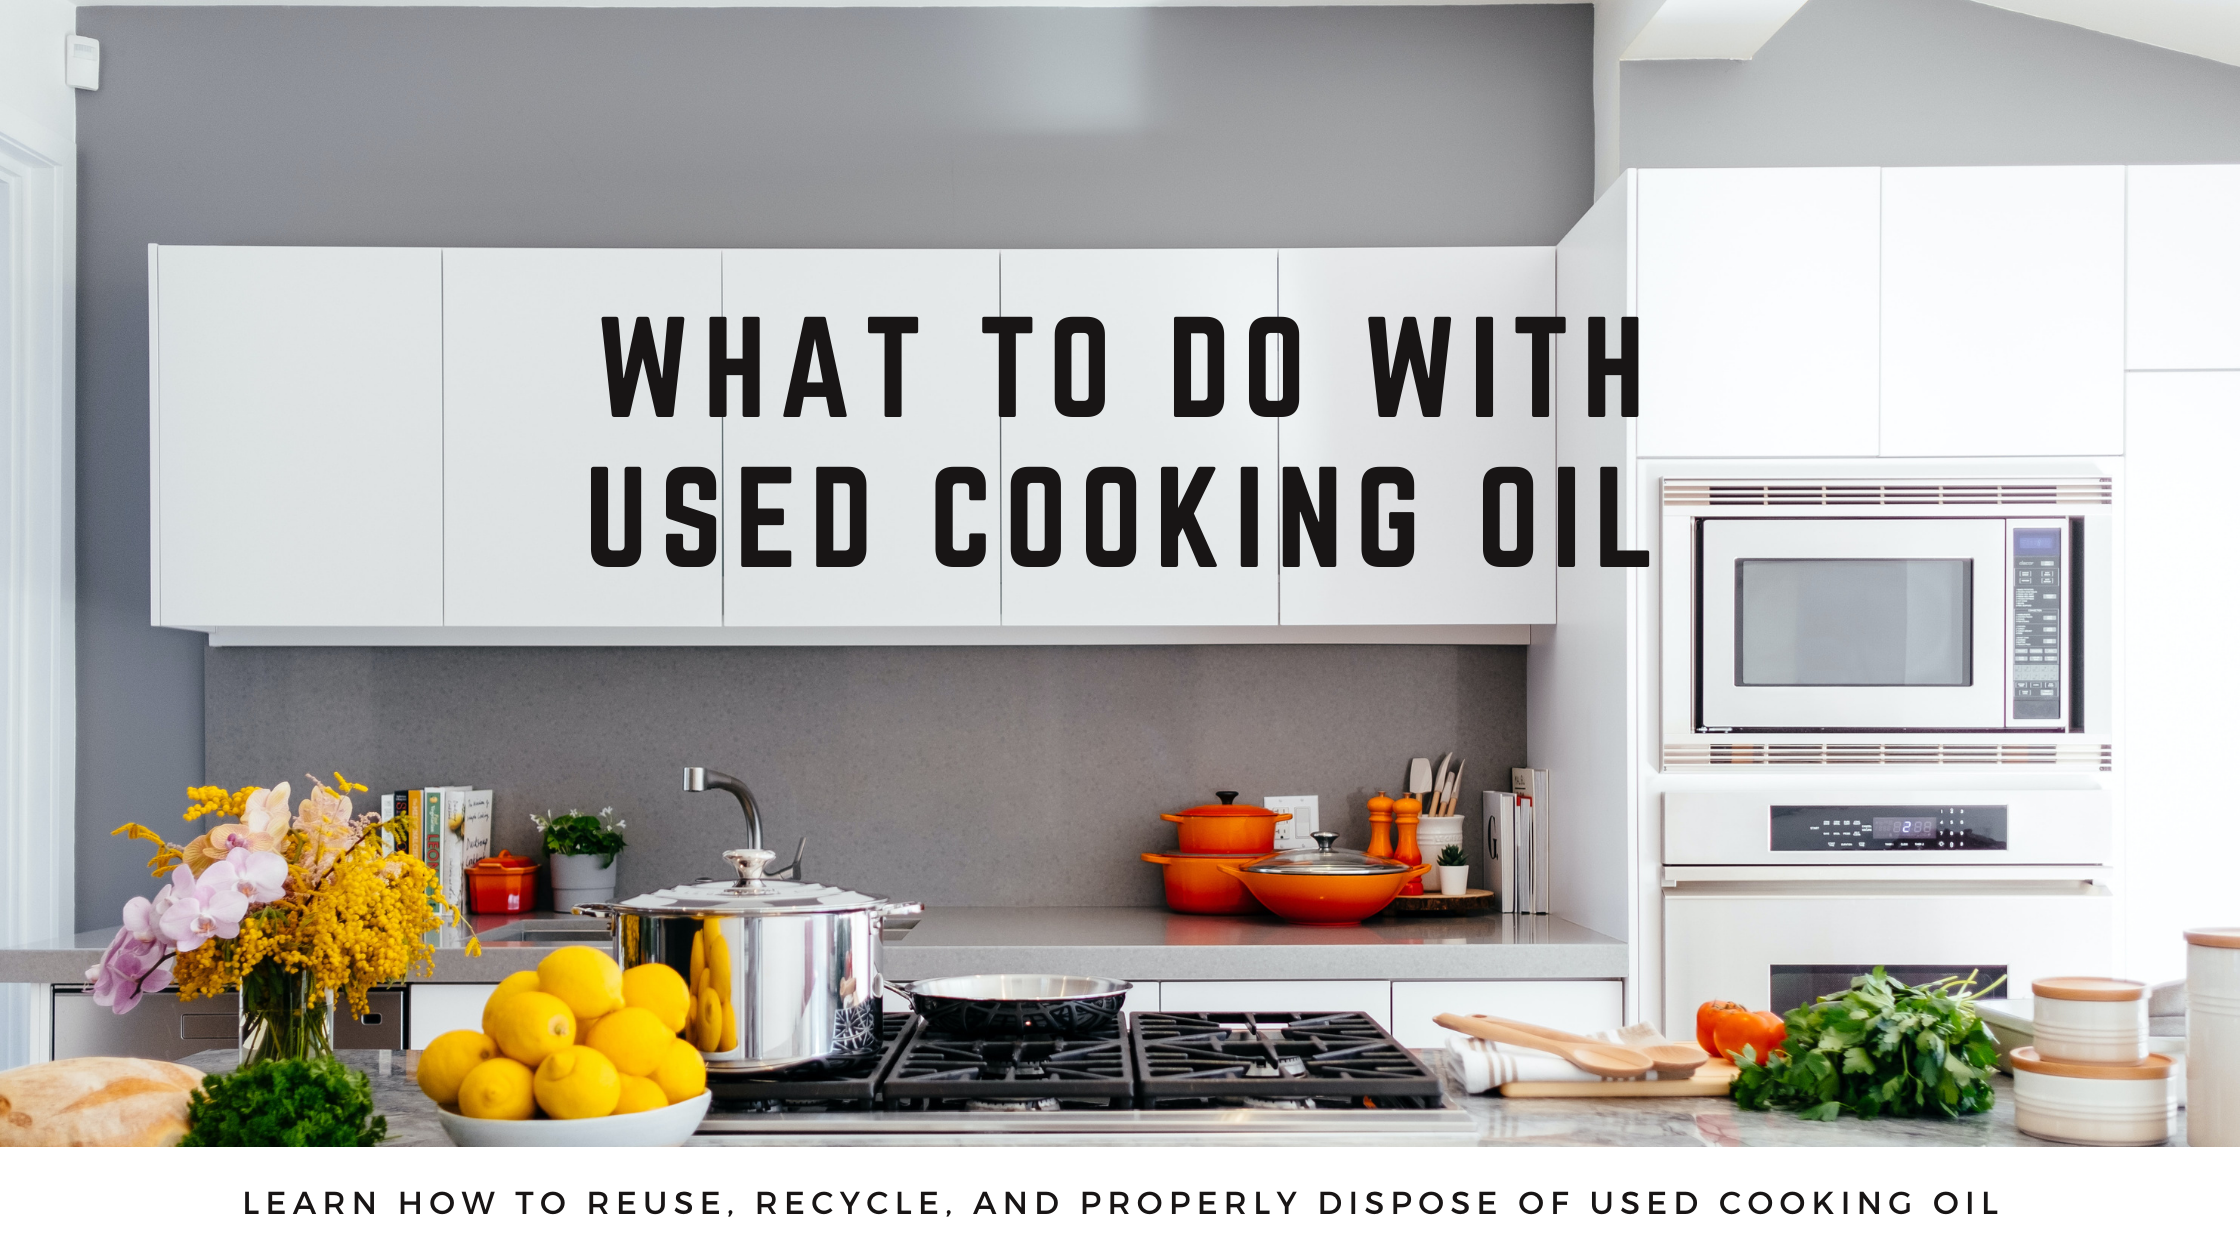 https://discountdumpsterco.com/wp-content/uploads/What-to-Do-With-Used-Cooking-Oil.png